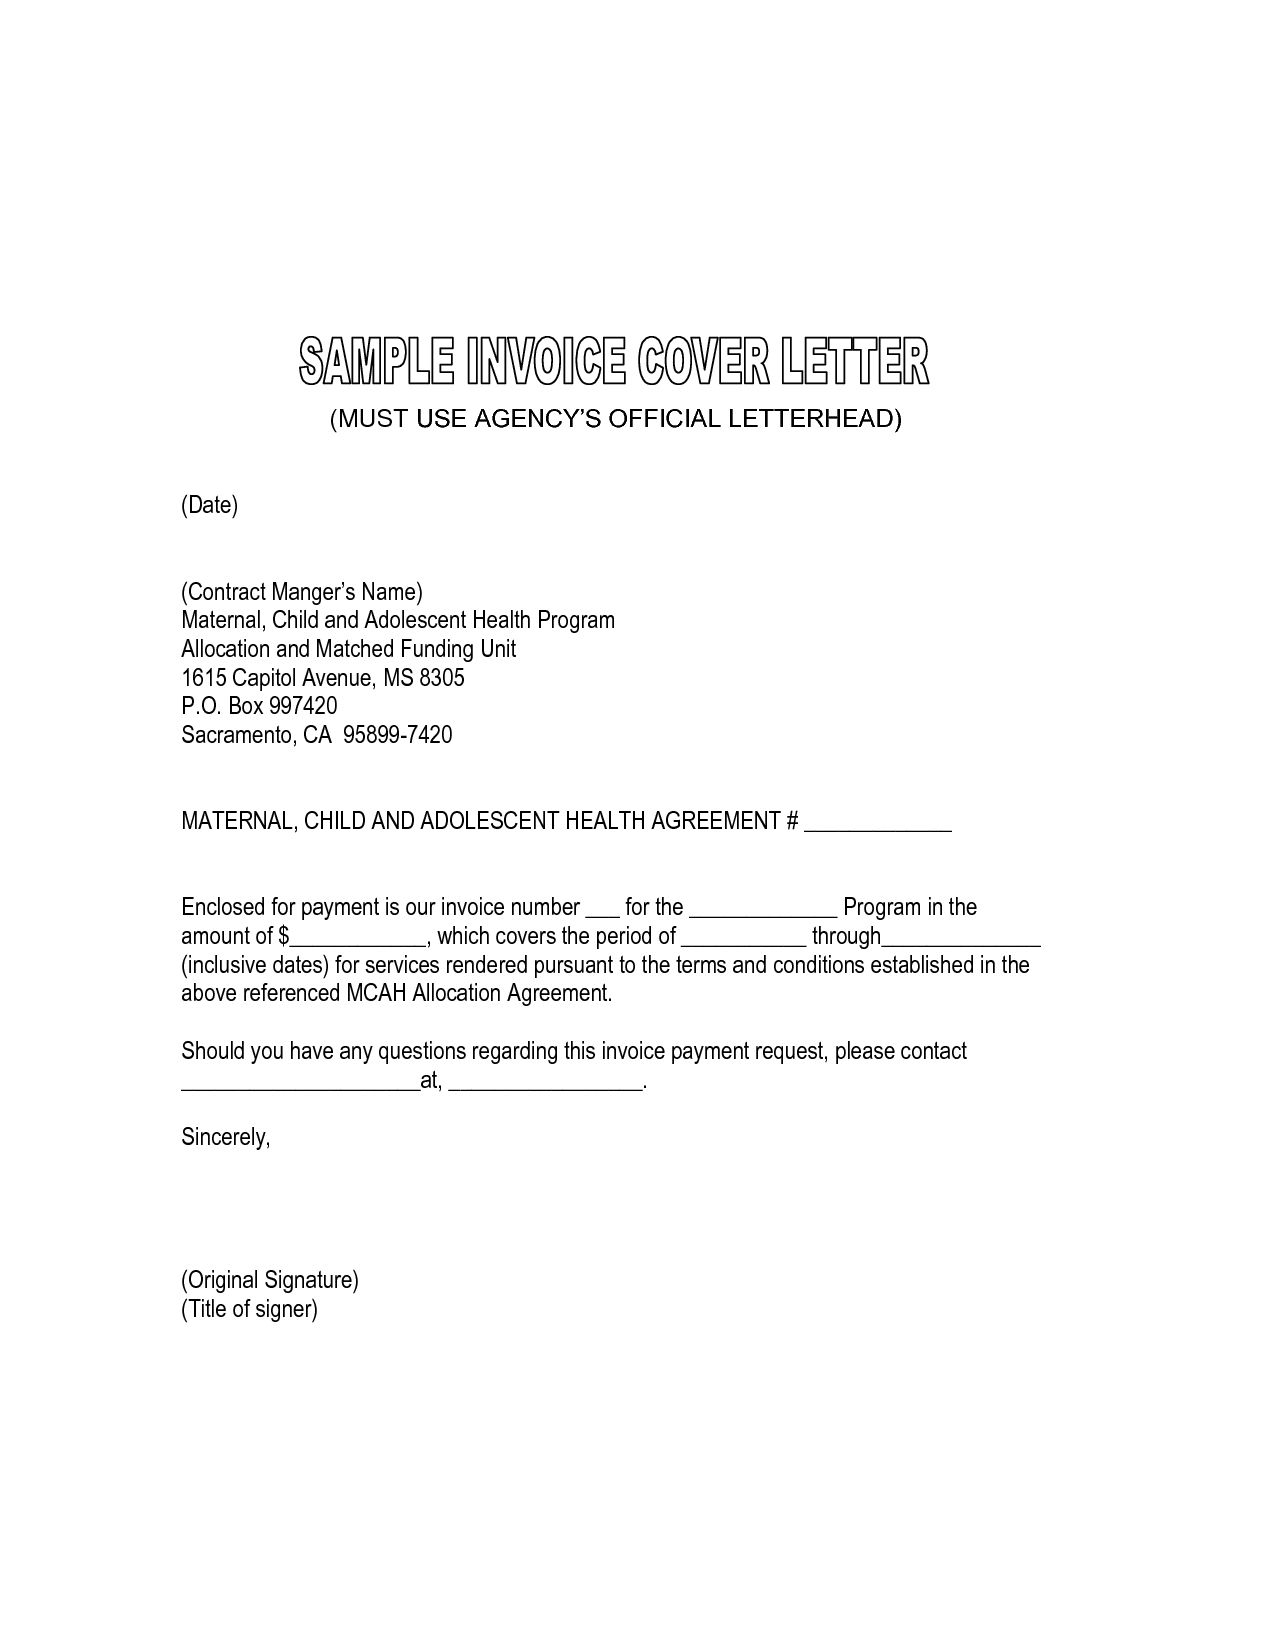 Sample Invoice Cover Letter For Payment